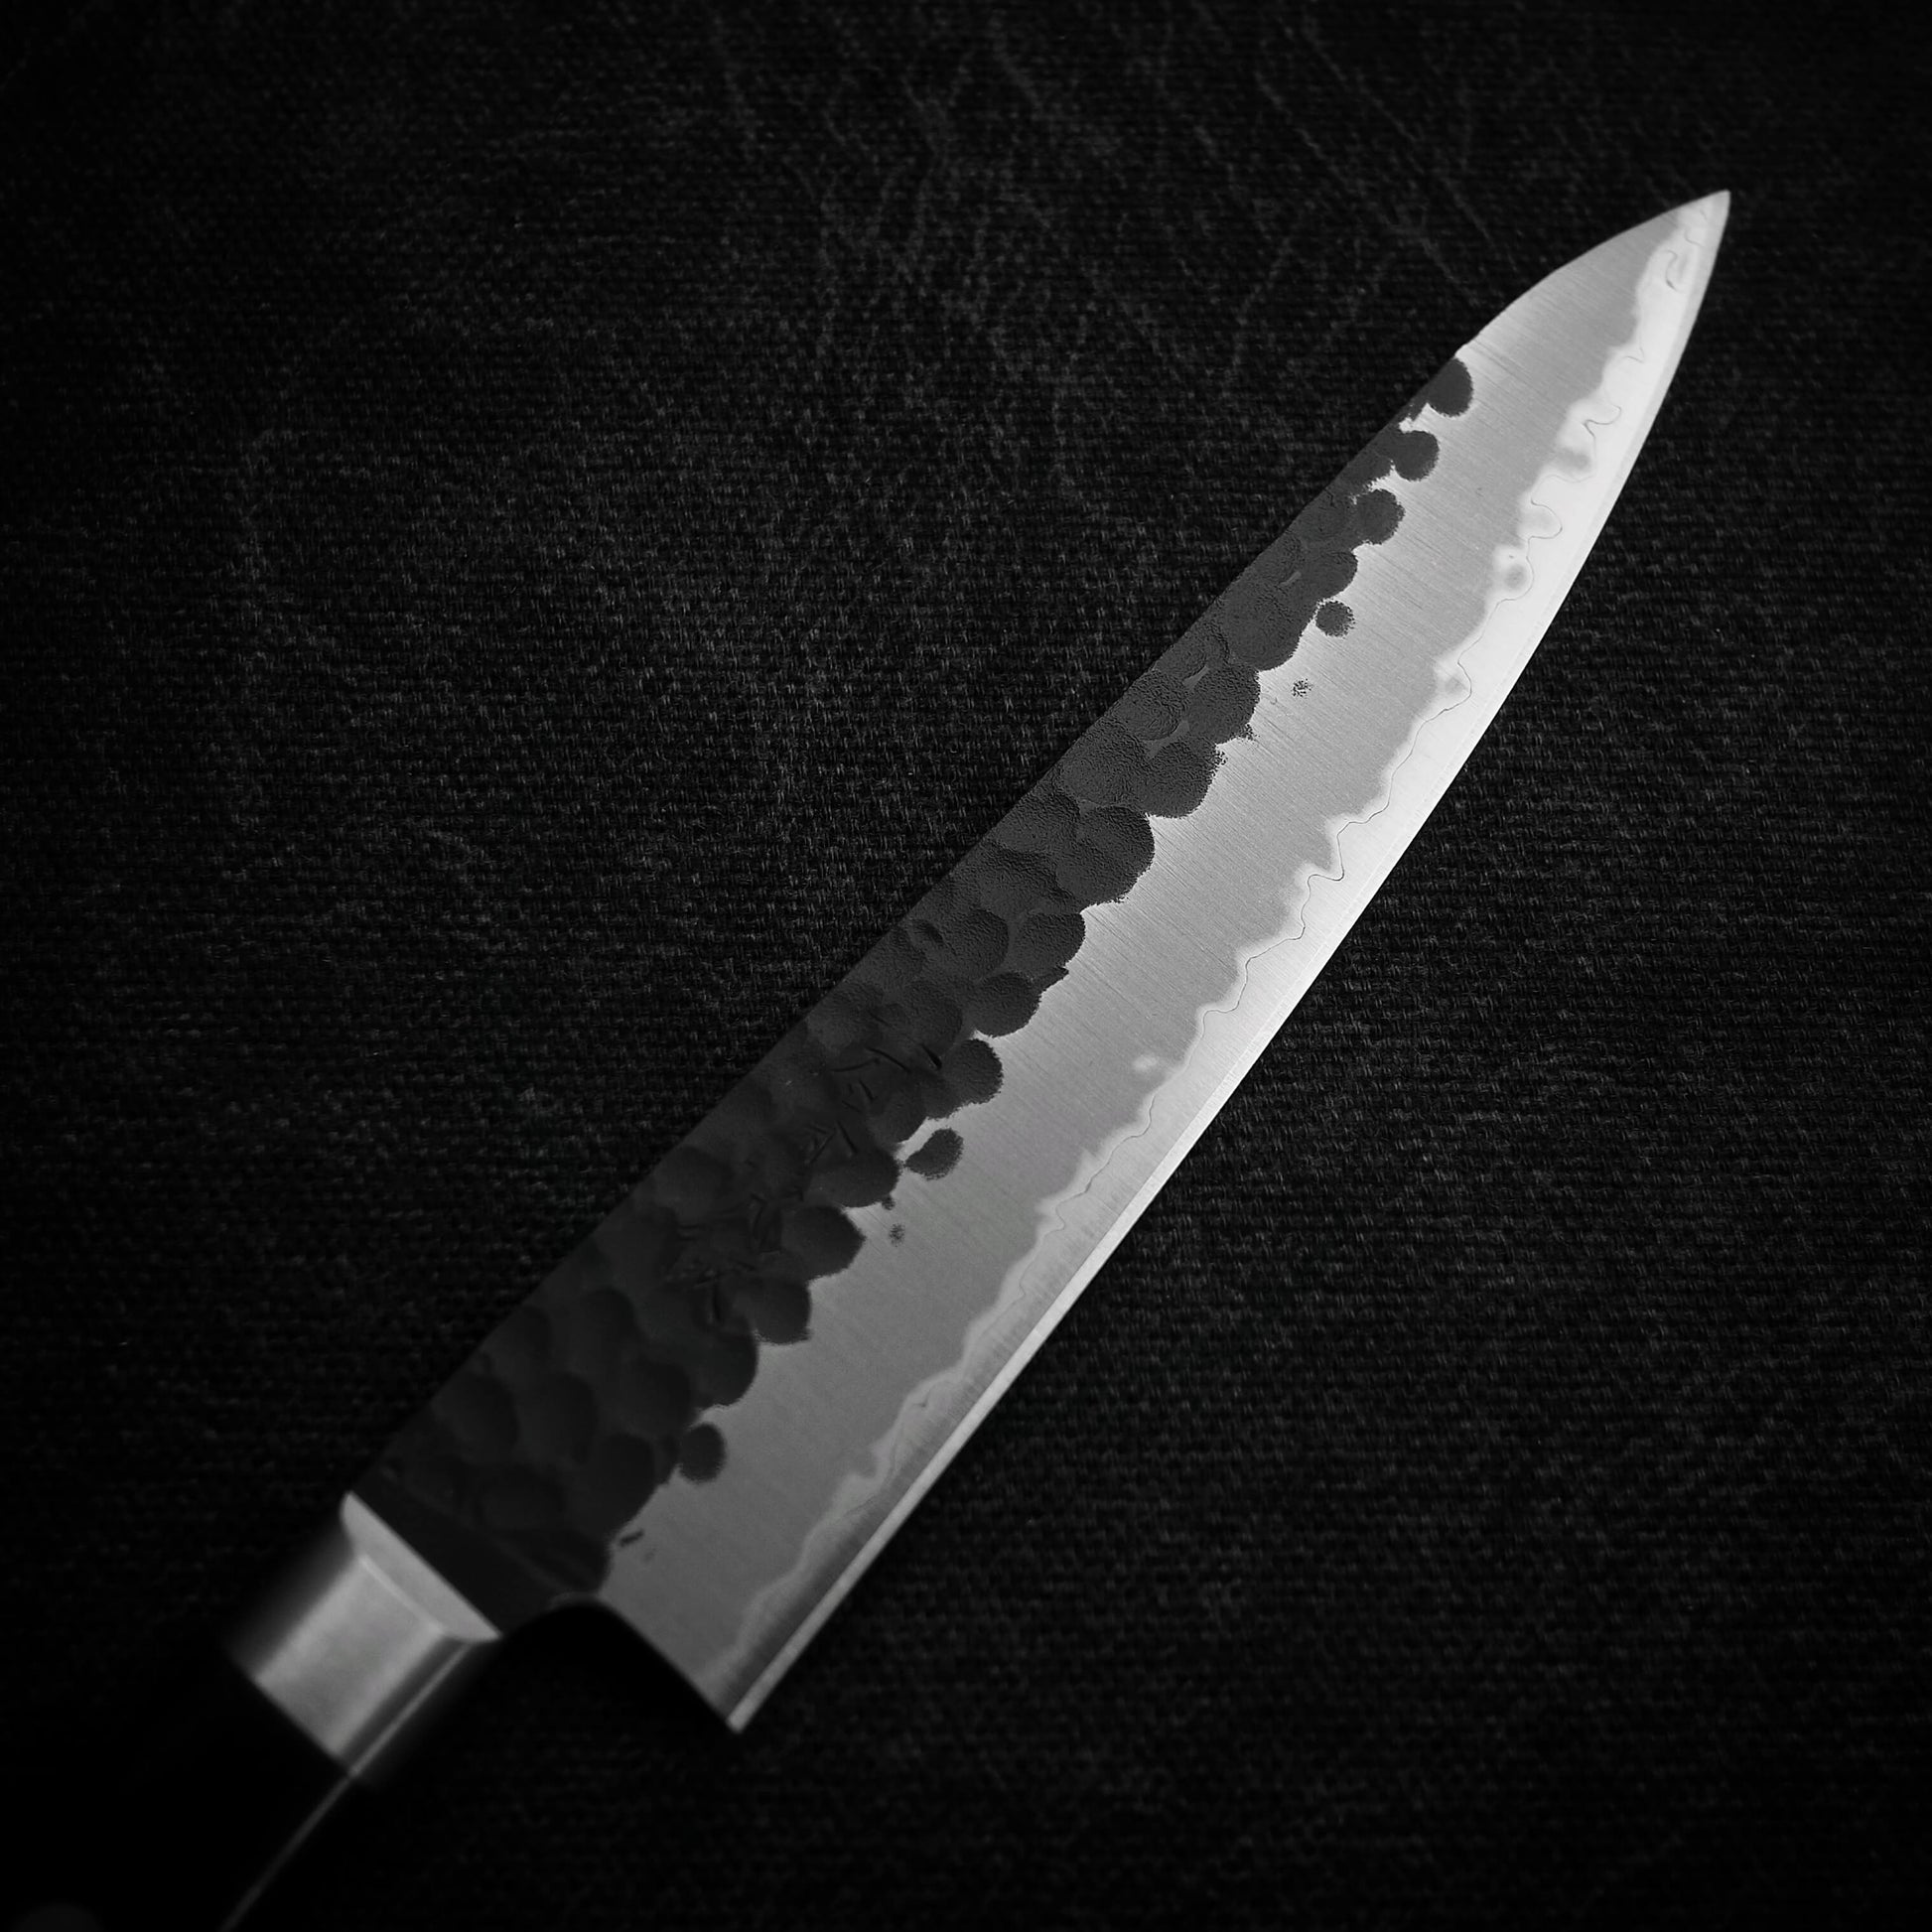 Top view of the blade of Ittosai Kotetsu tsuchime kurouchi aogami super petty knife. Image focuses on the right side of the blade